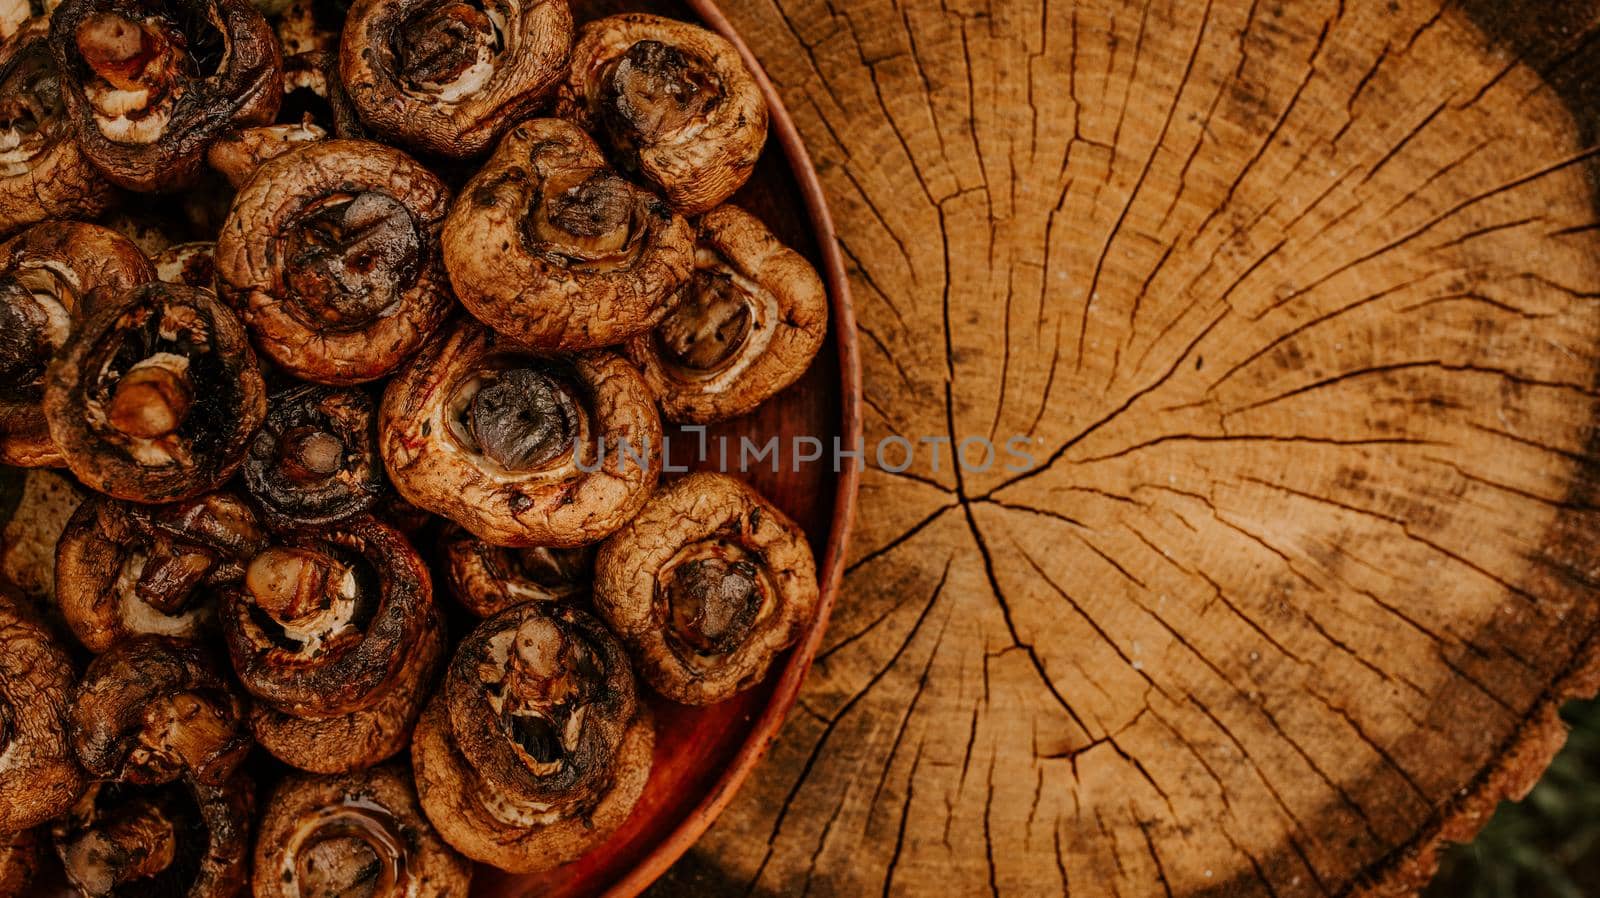 Cooked baked champignon mushrooms lie on a brown clay plate on a cracked brown hemp. Summer green blurred grass background.